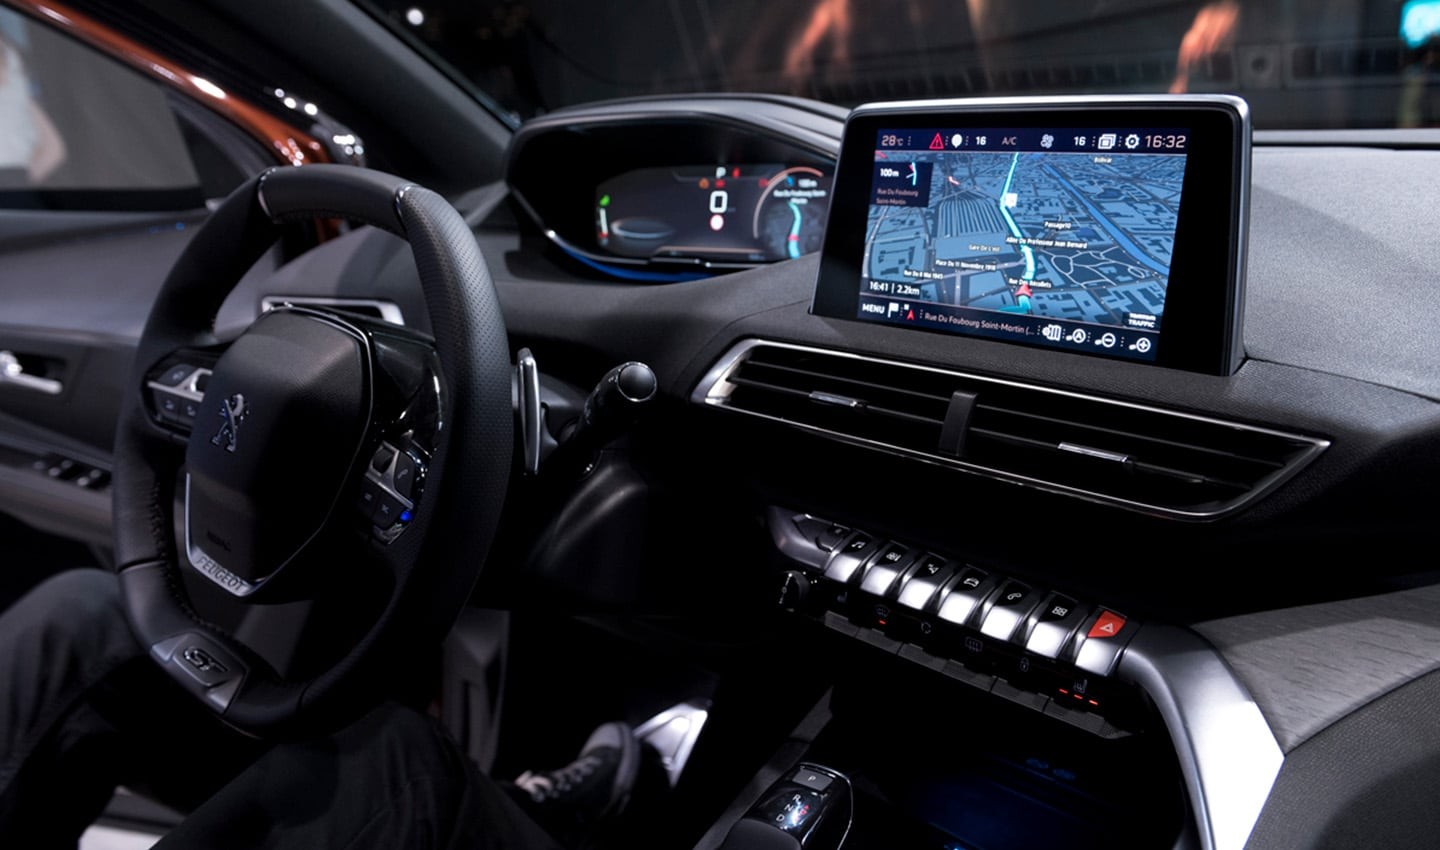 The infotainment system in new Peugeots features a cluster screen and central screen.